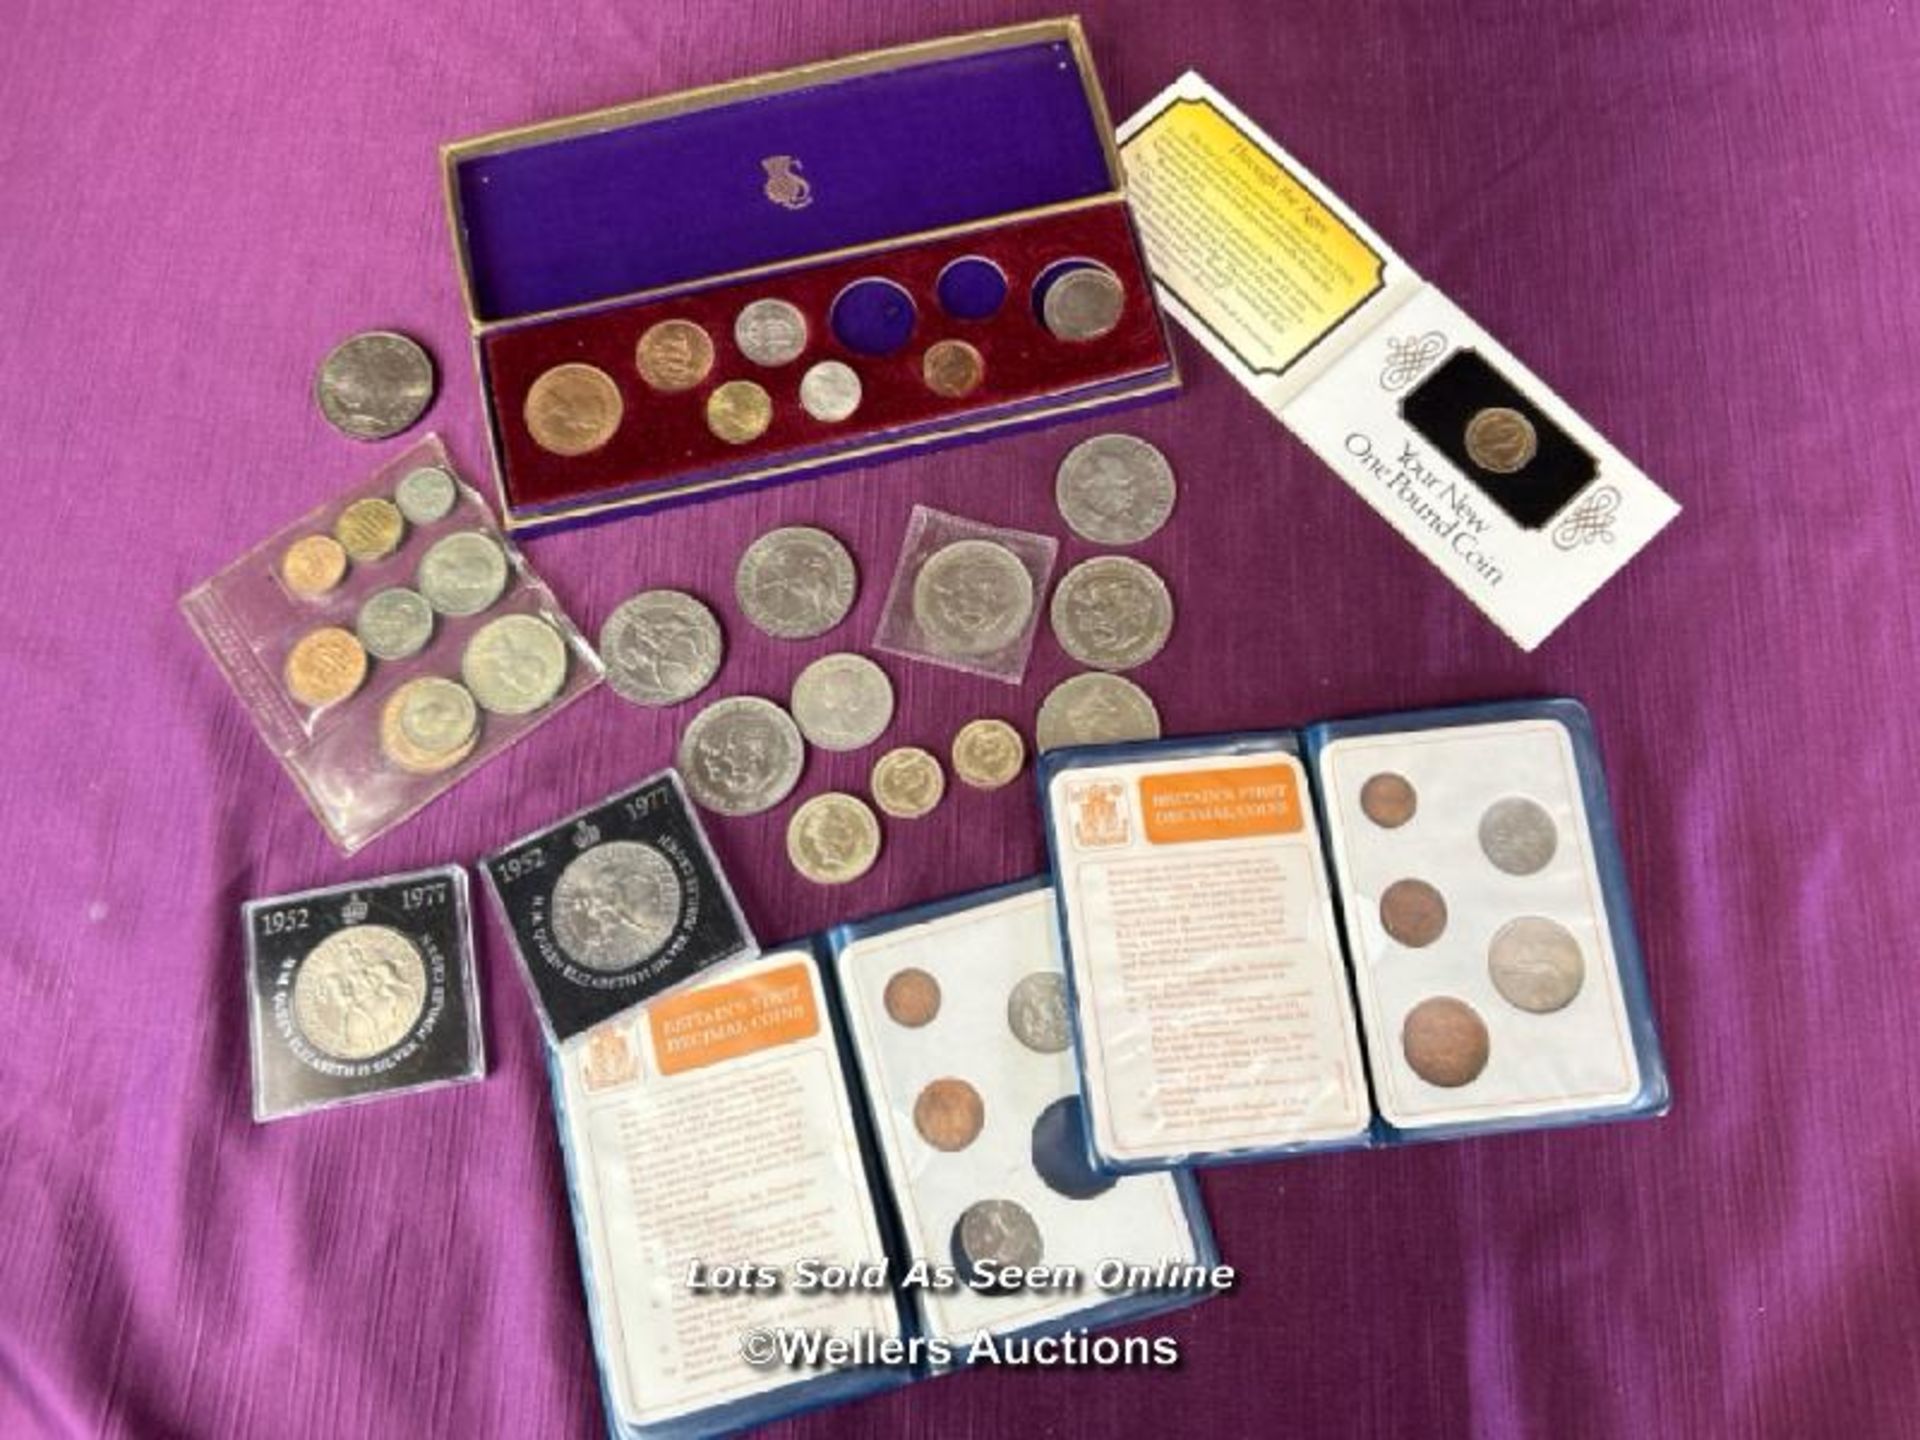 LARGE COLLECTION OF BRITISH COMMEMORATIVE COINS INCLUDING EARLY £1 AND £2 COINS AND SILVER JUBILEE